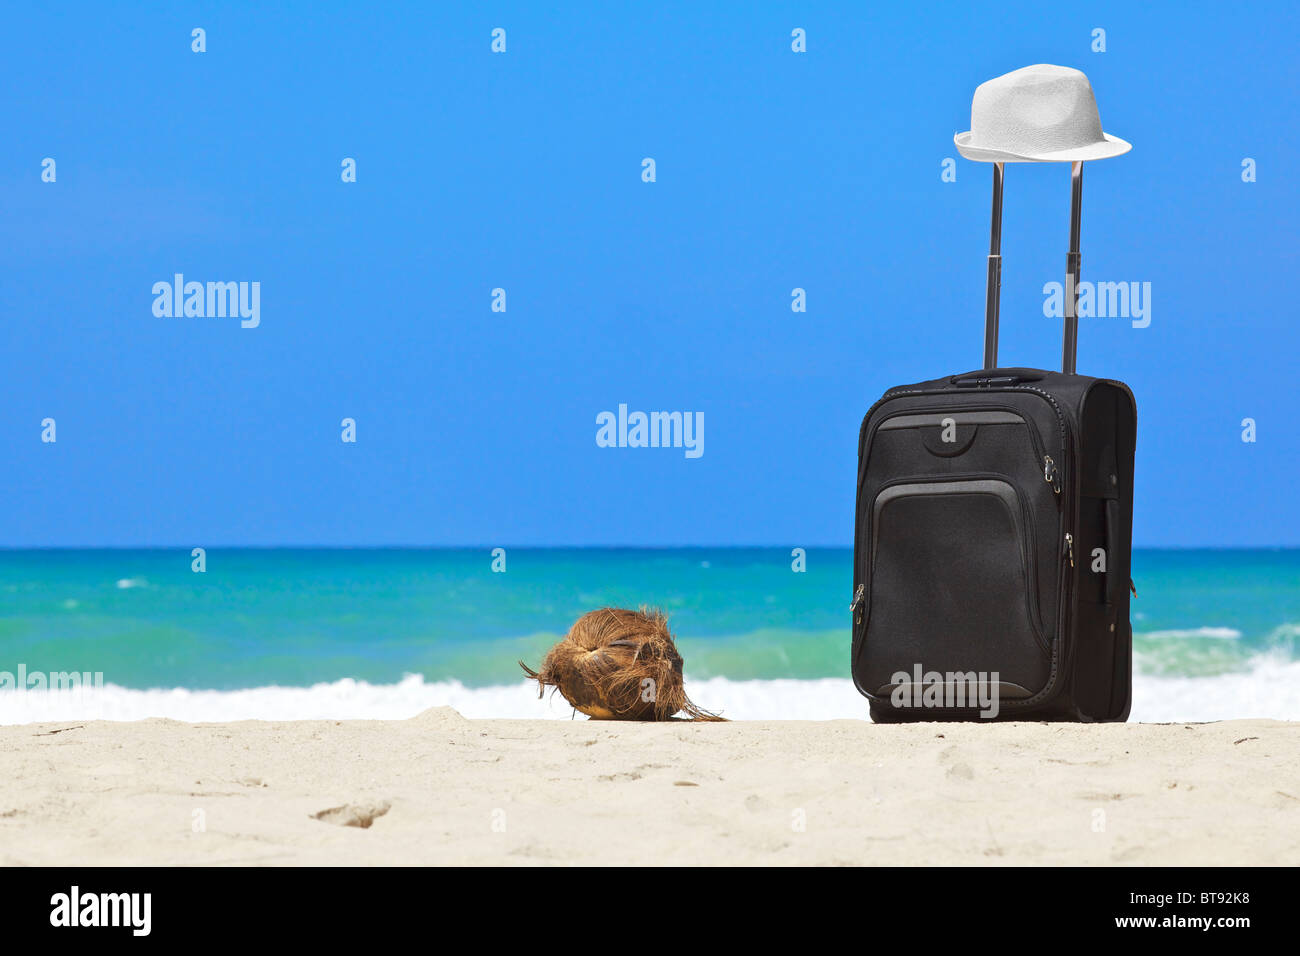 Suitcase on the tropical beach Stock Photo